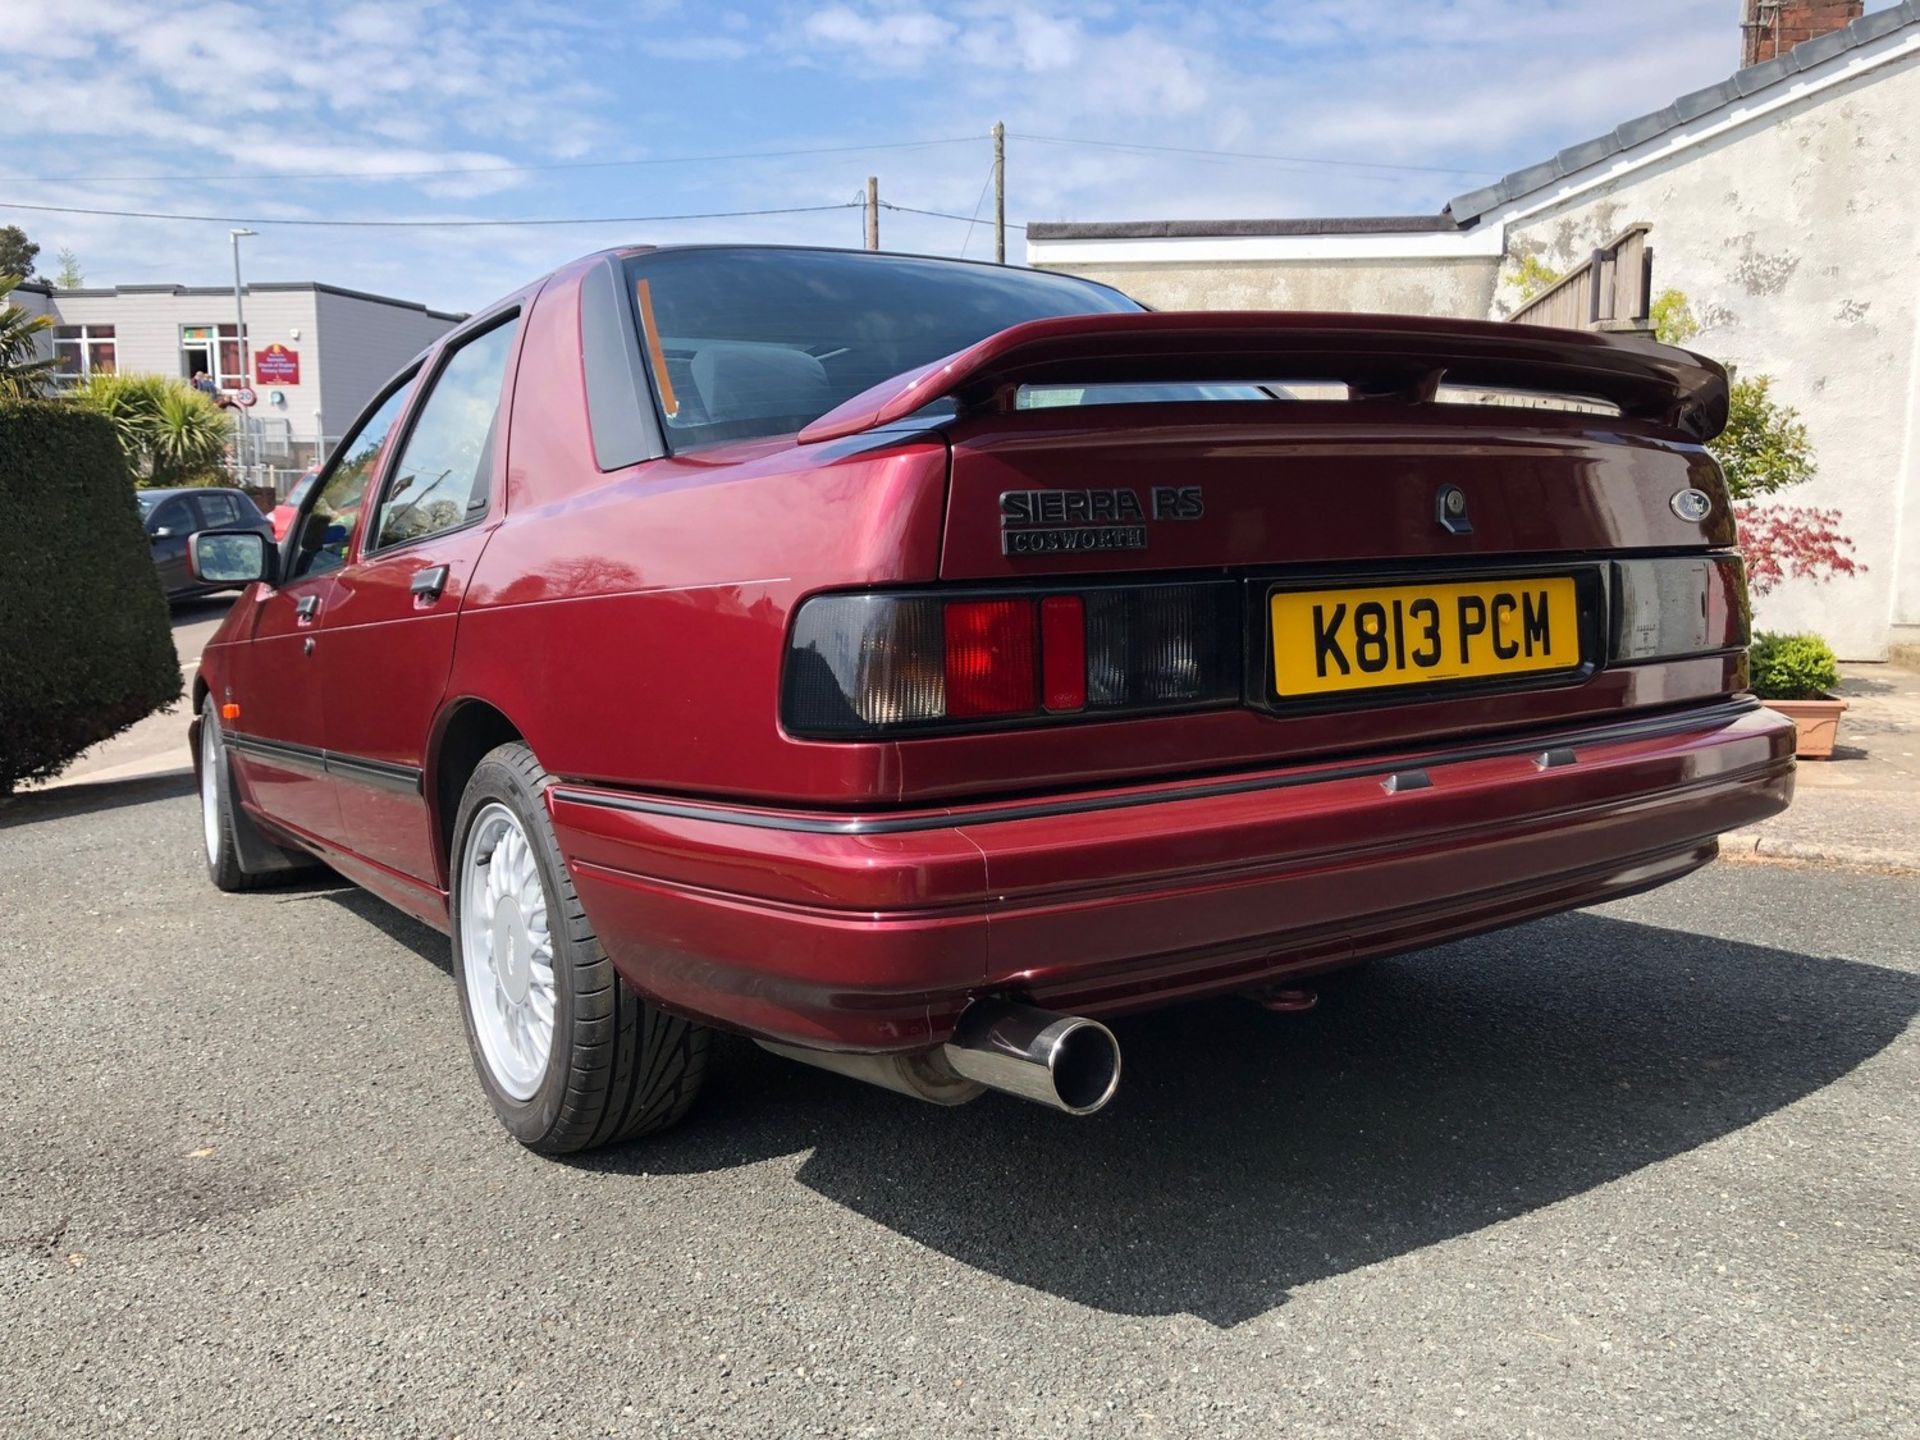 1992 Ford Sierra Sapphire Cosworth 4x4 Registration number K813 PCM Nouveau red, Recaro seats Bought